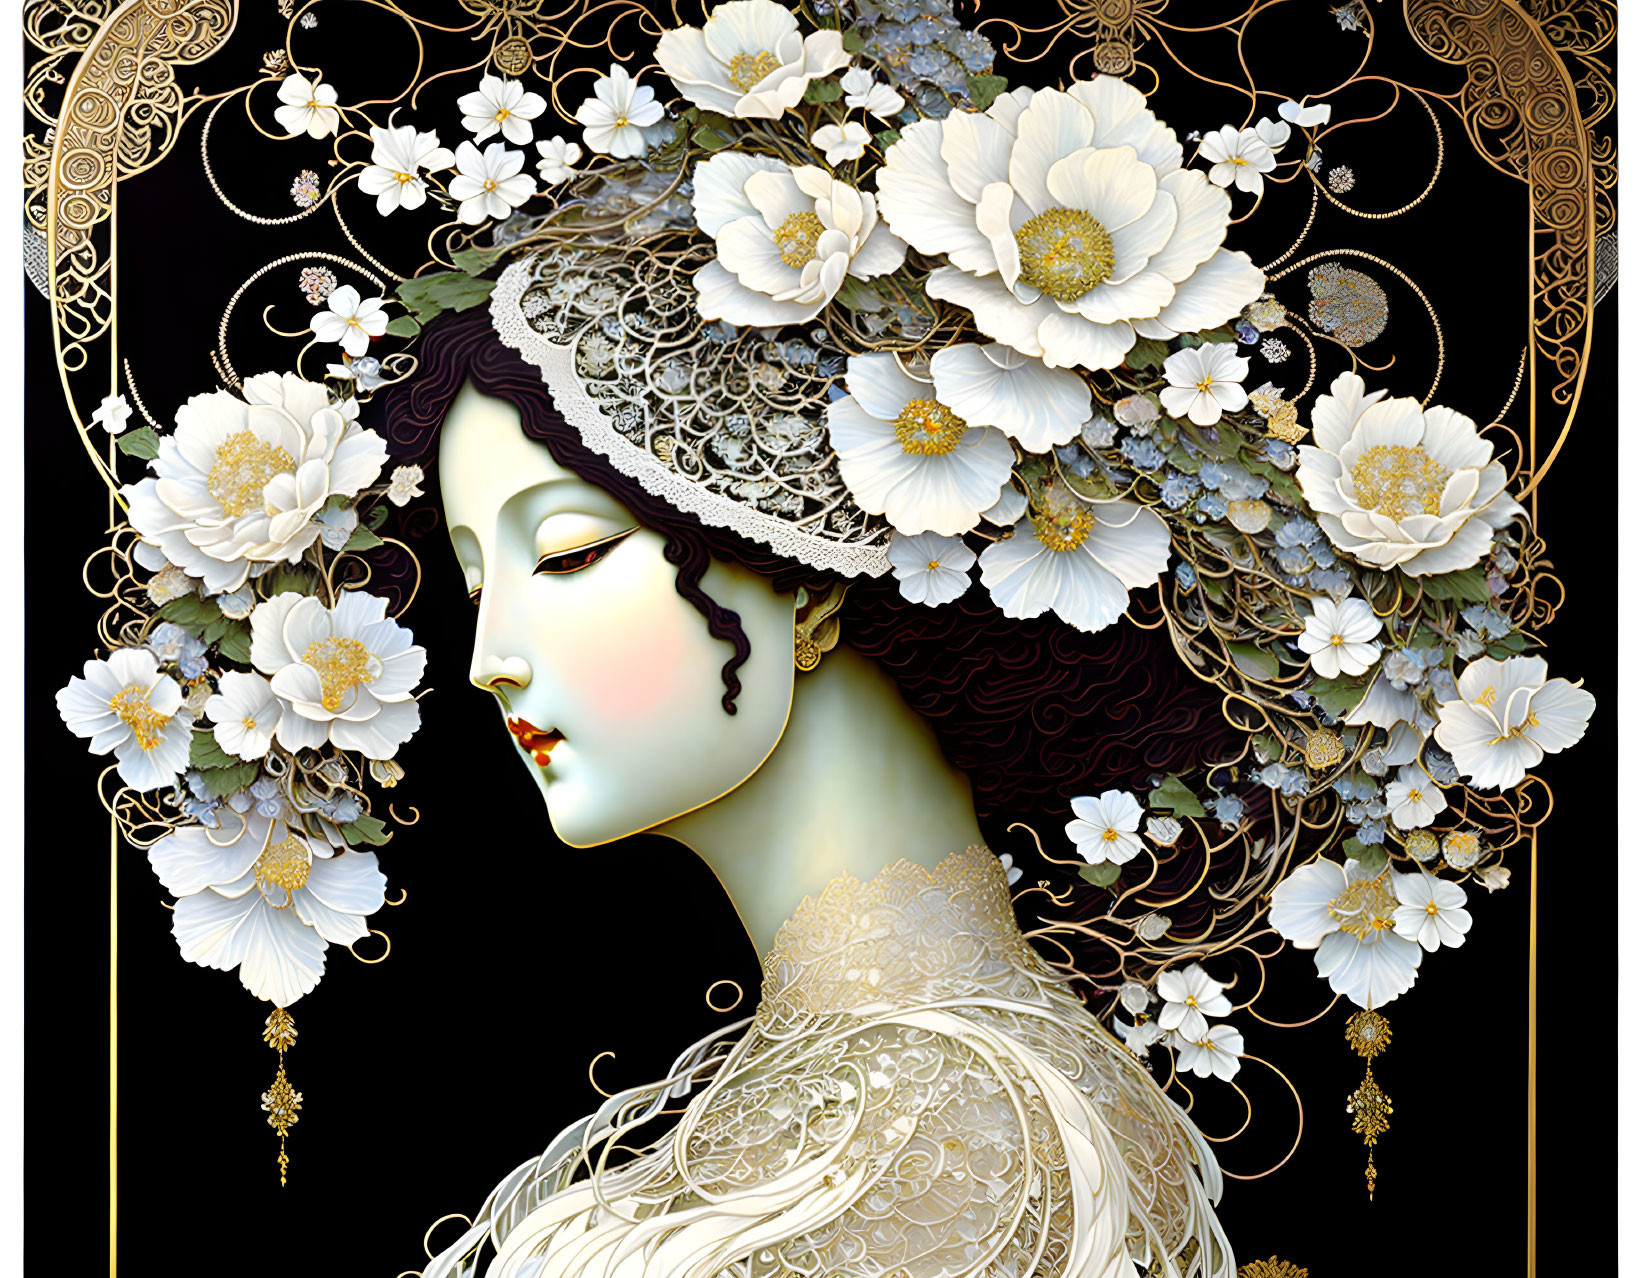 Stylized illustration of woman with pale skin and white flowers on black background